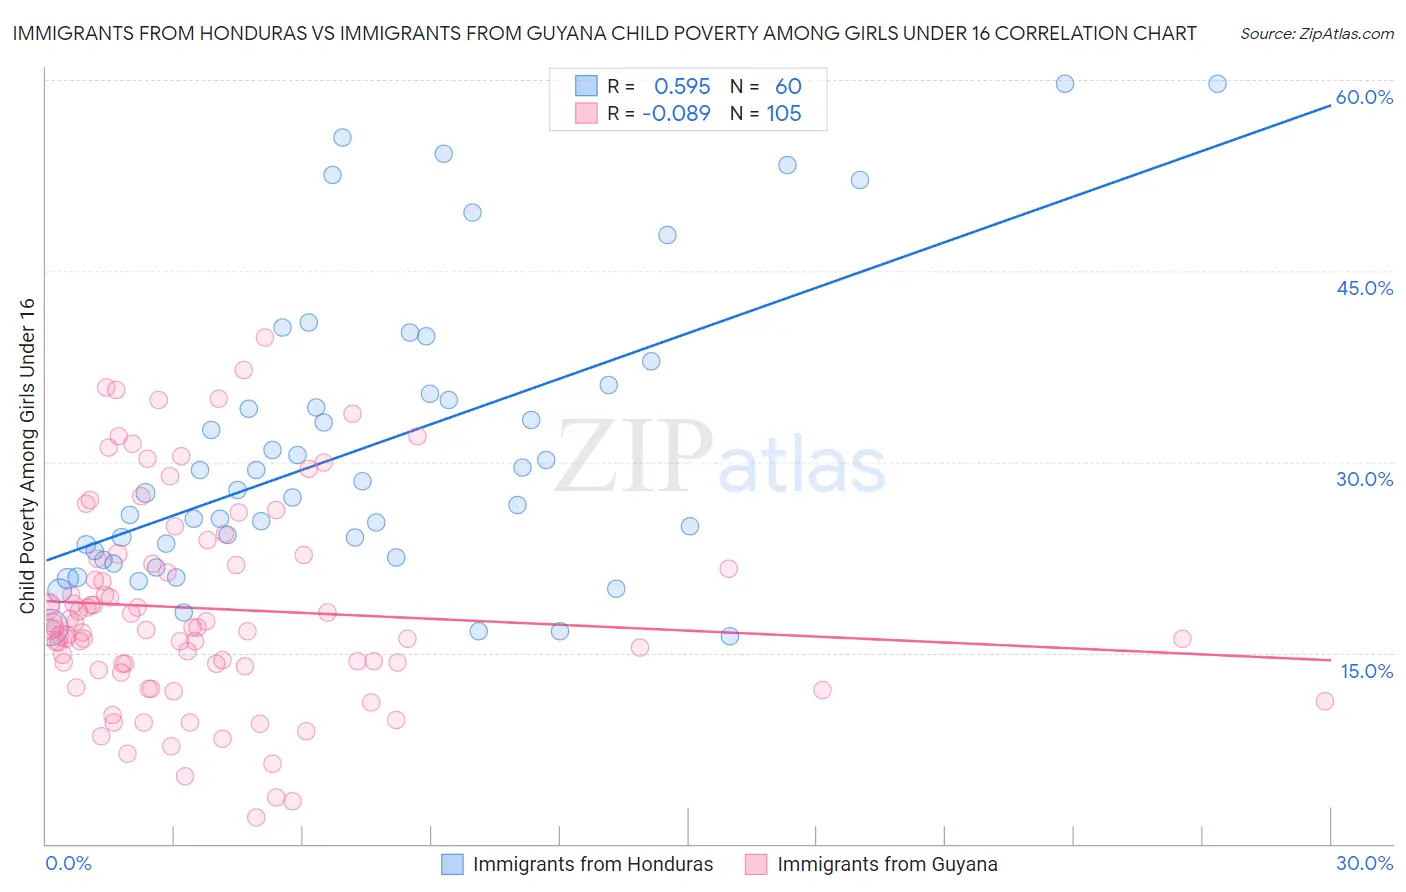 Immigrants from Honduras vs Immigrants from Guyana Child Poverty Among Girls Under 16